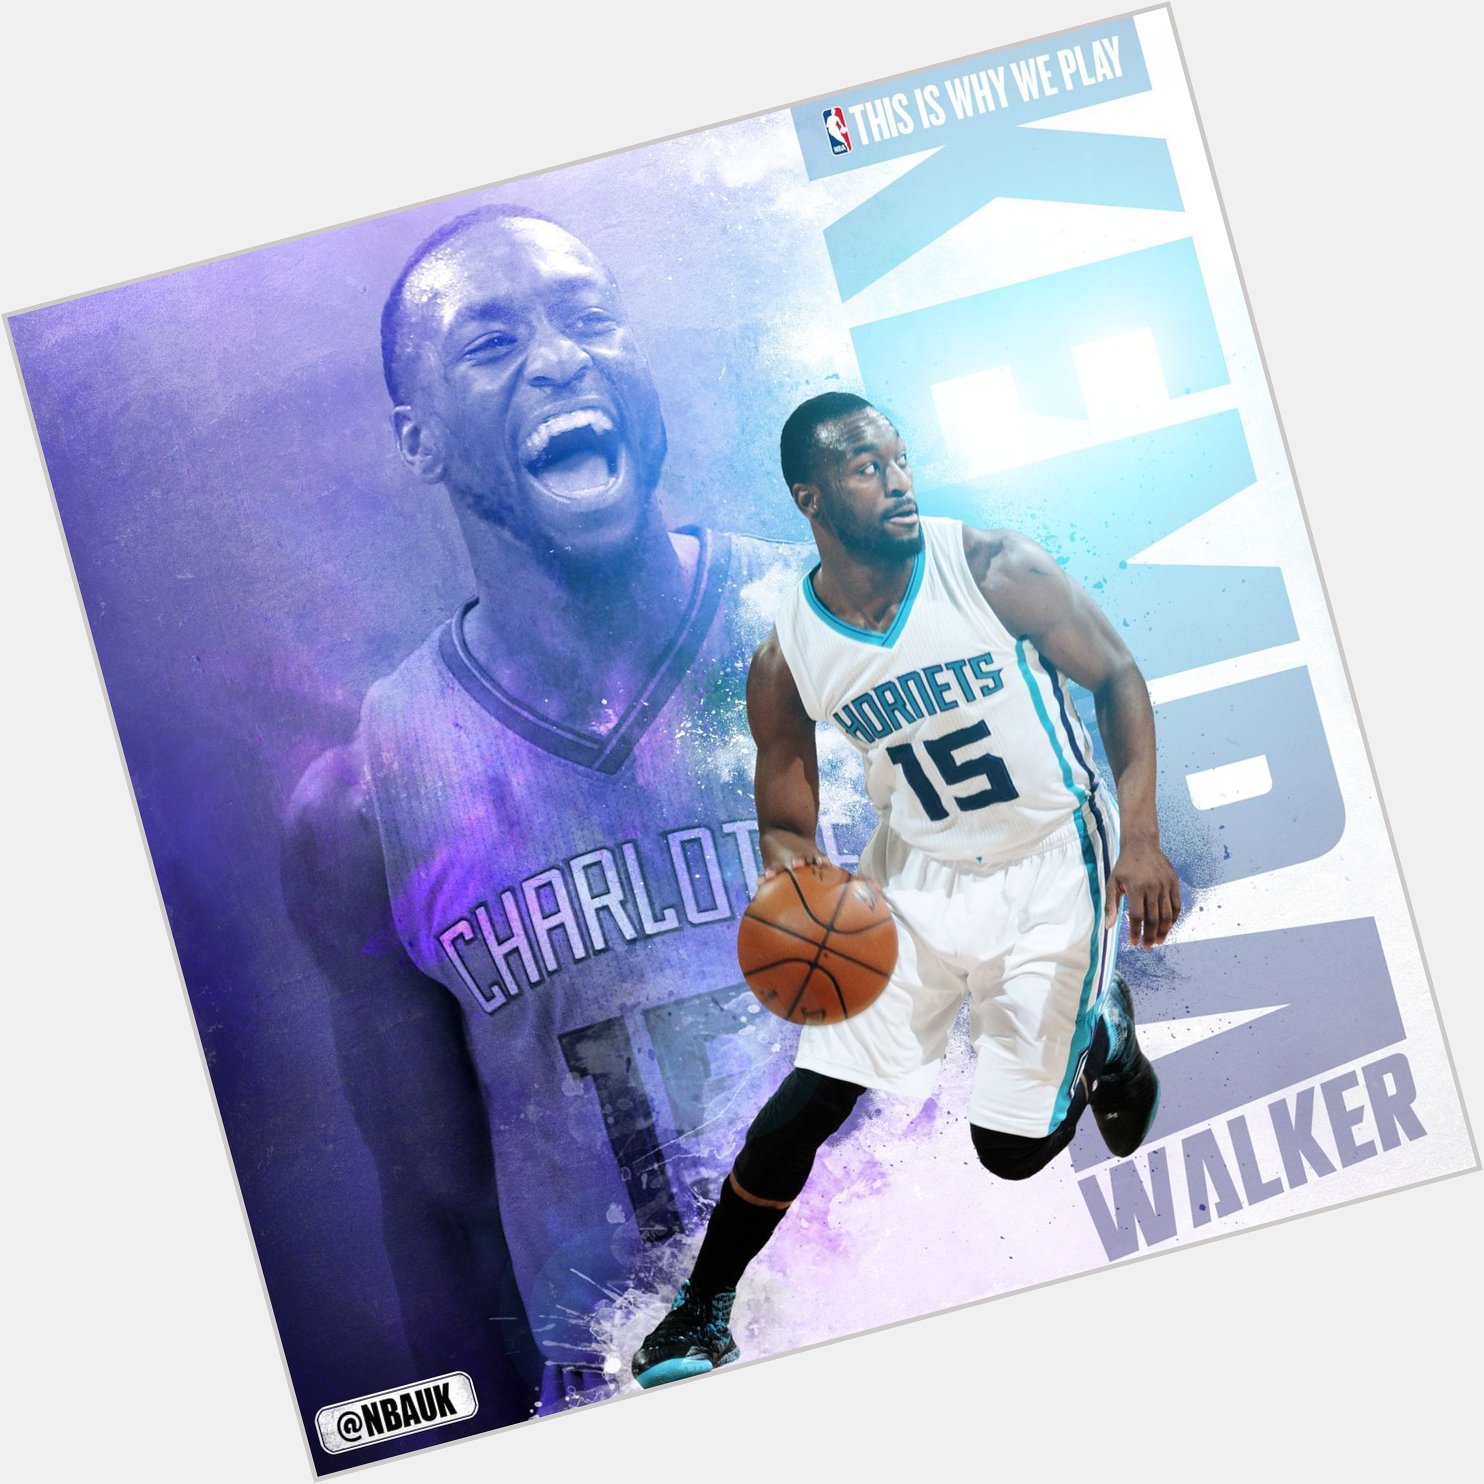   Join us as we wish 2017 NBA All-Star, Kemba Walker a very happy birthday! 